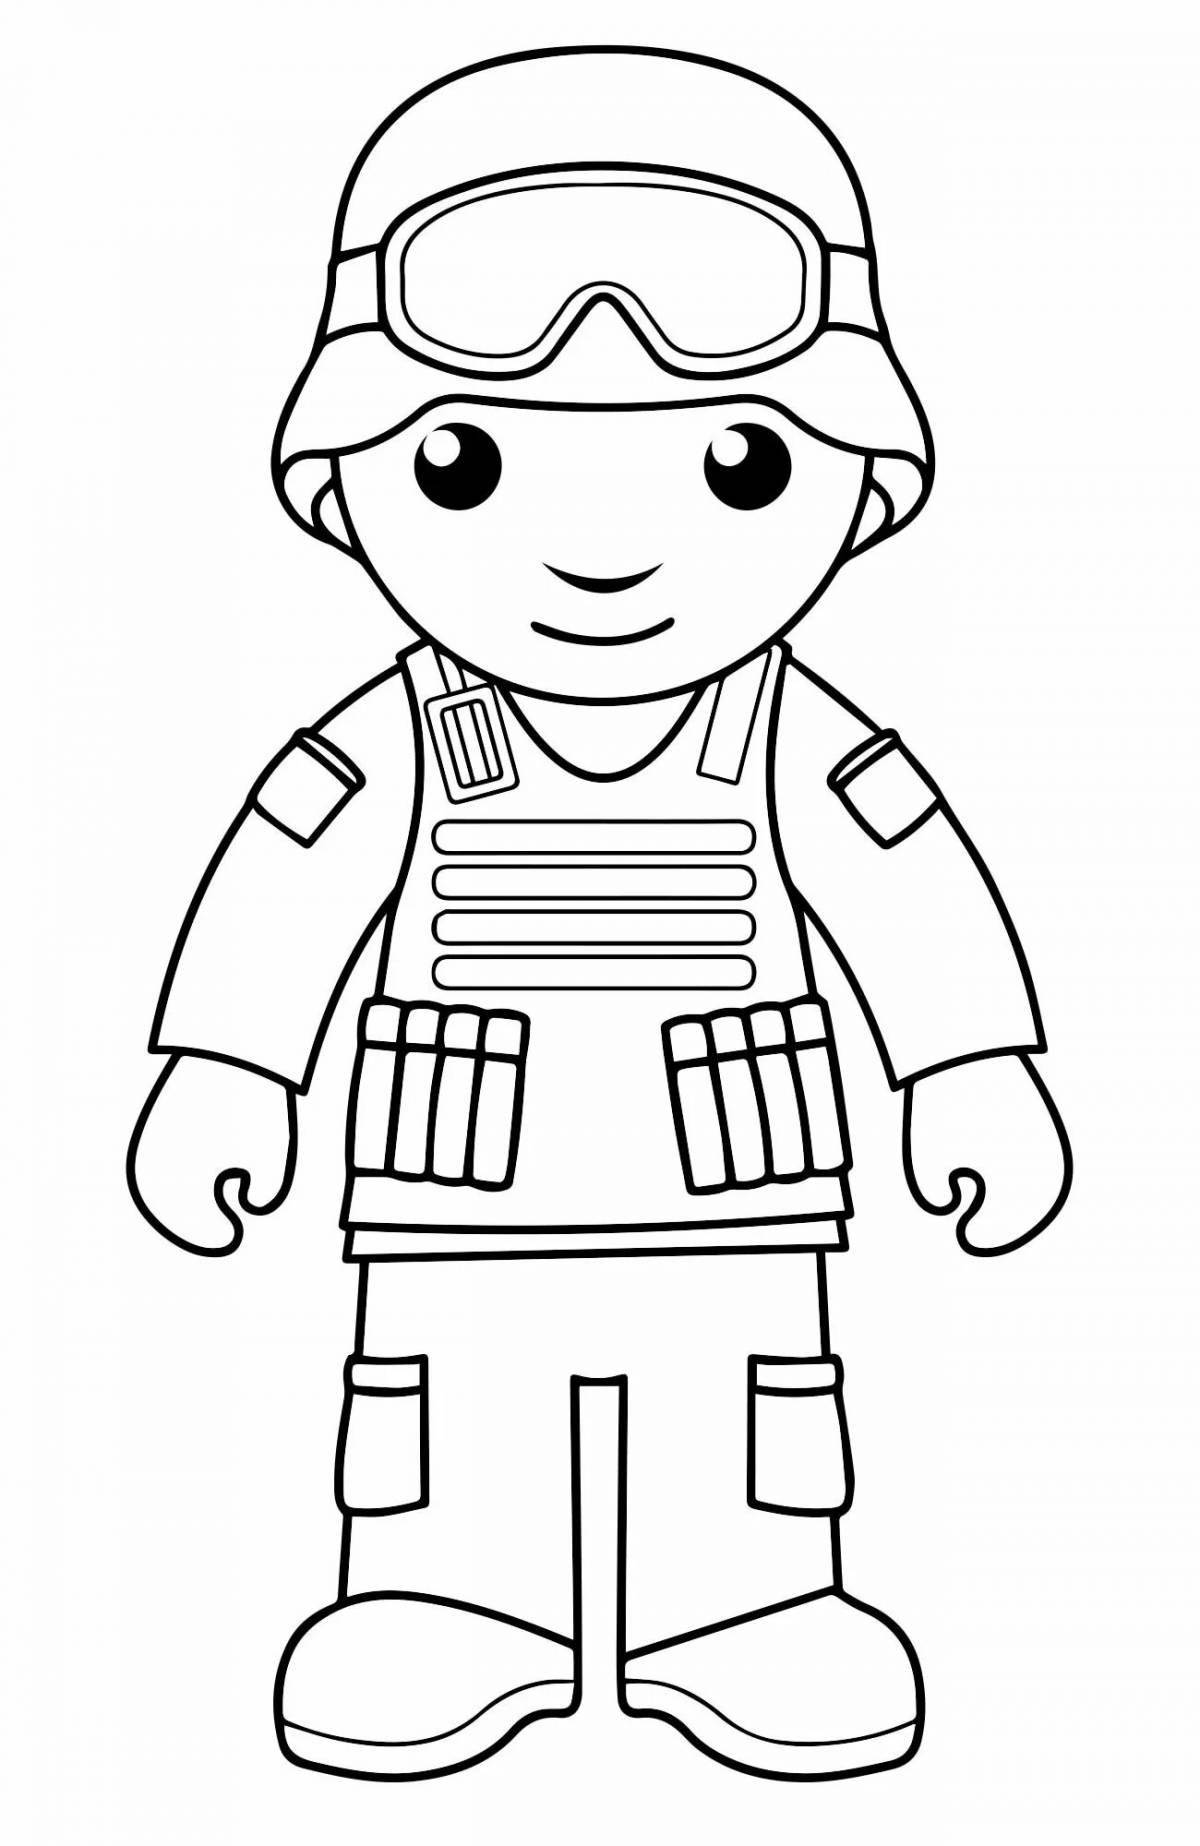 Adventure coloring pages soldiers for kids